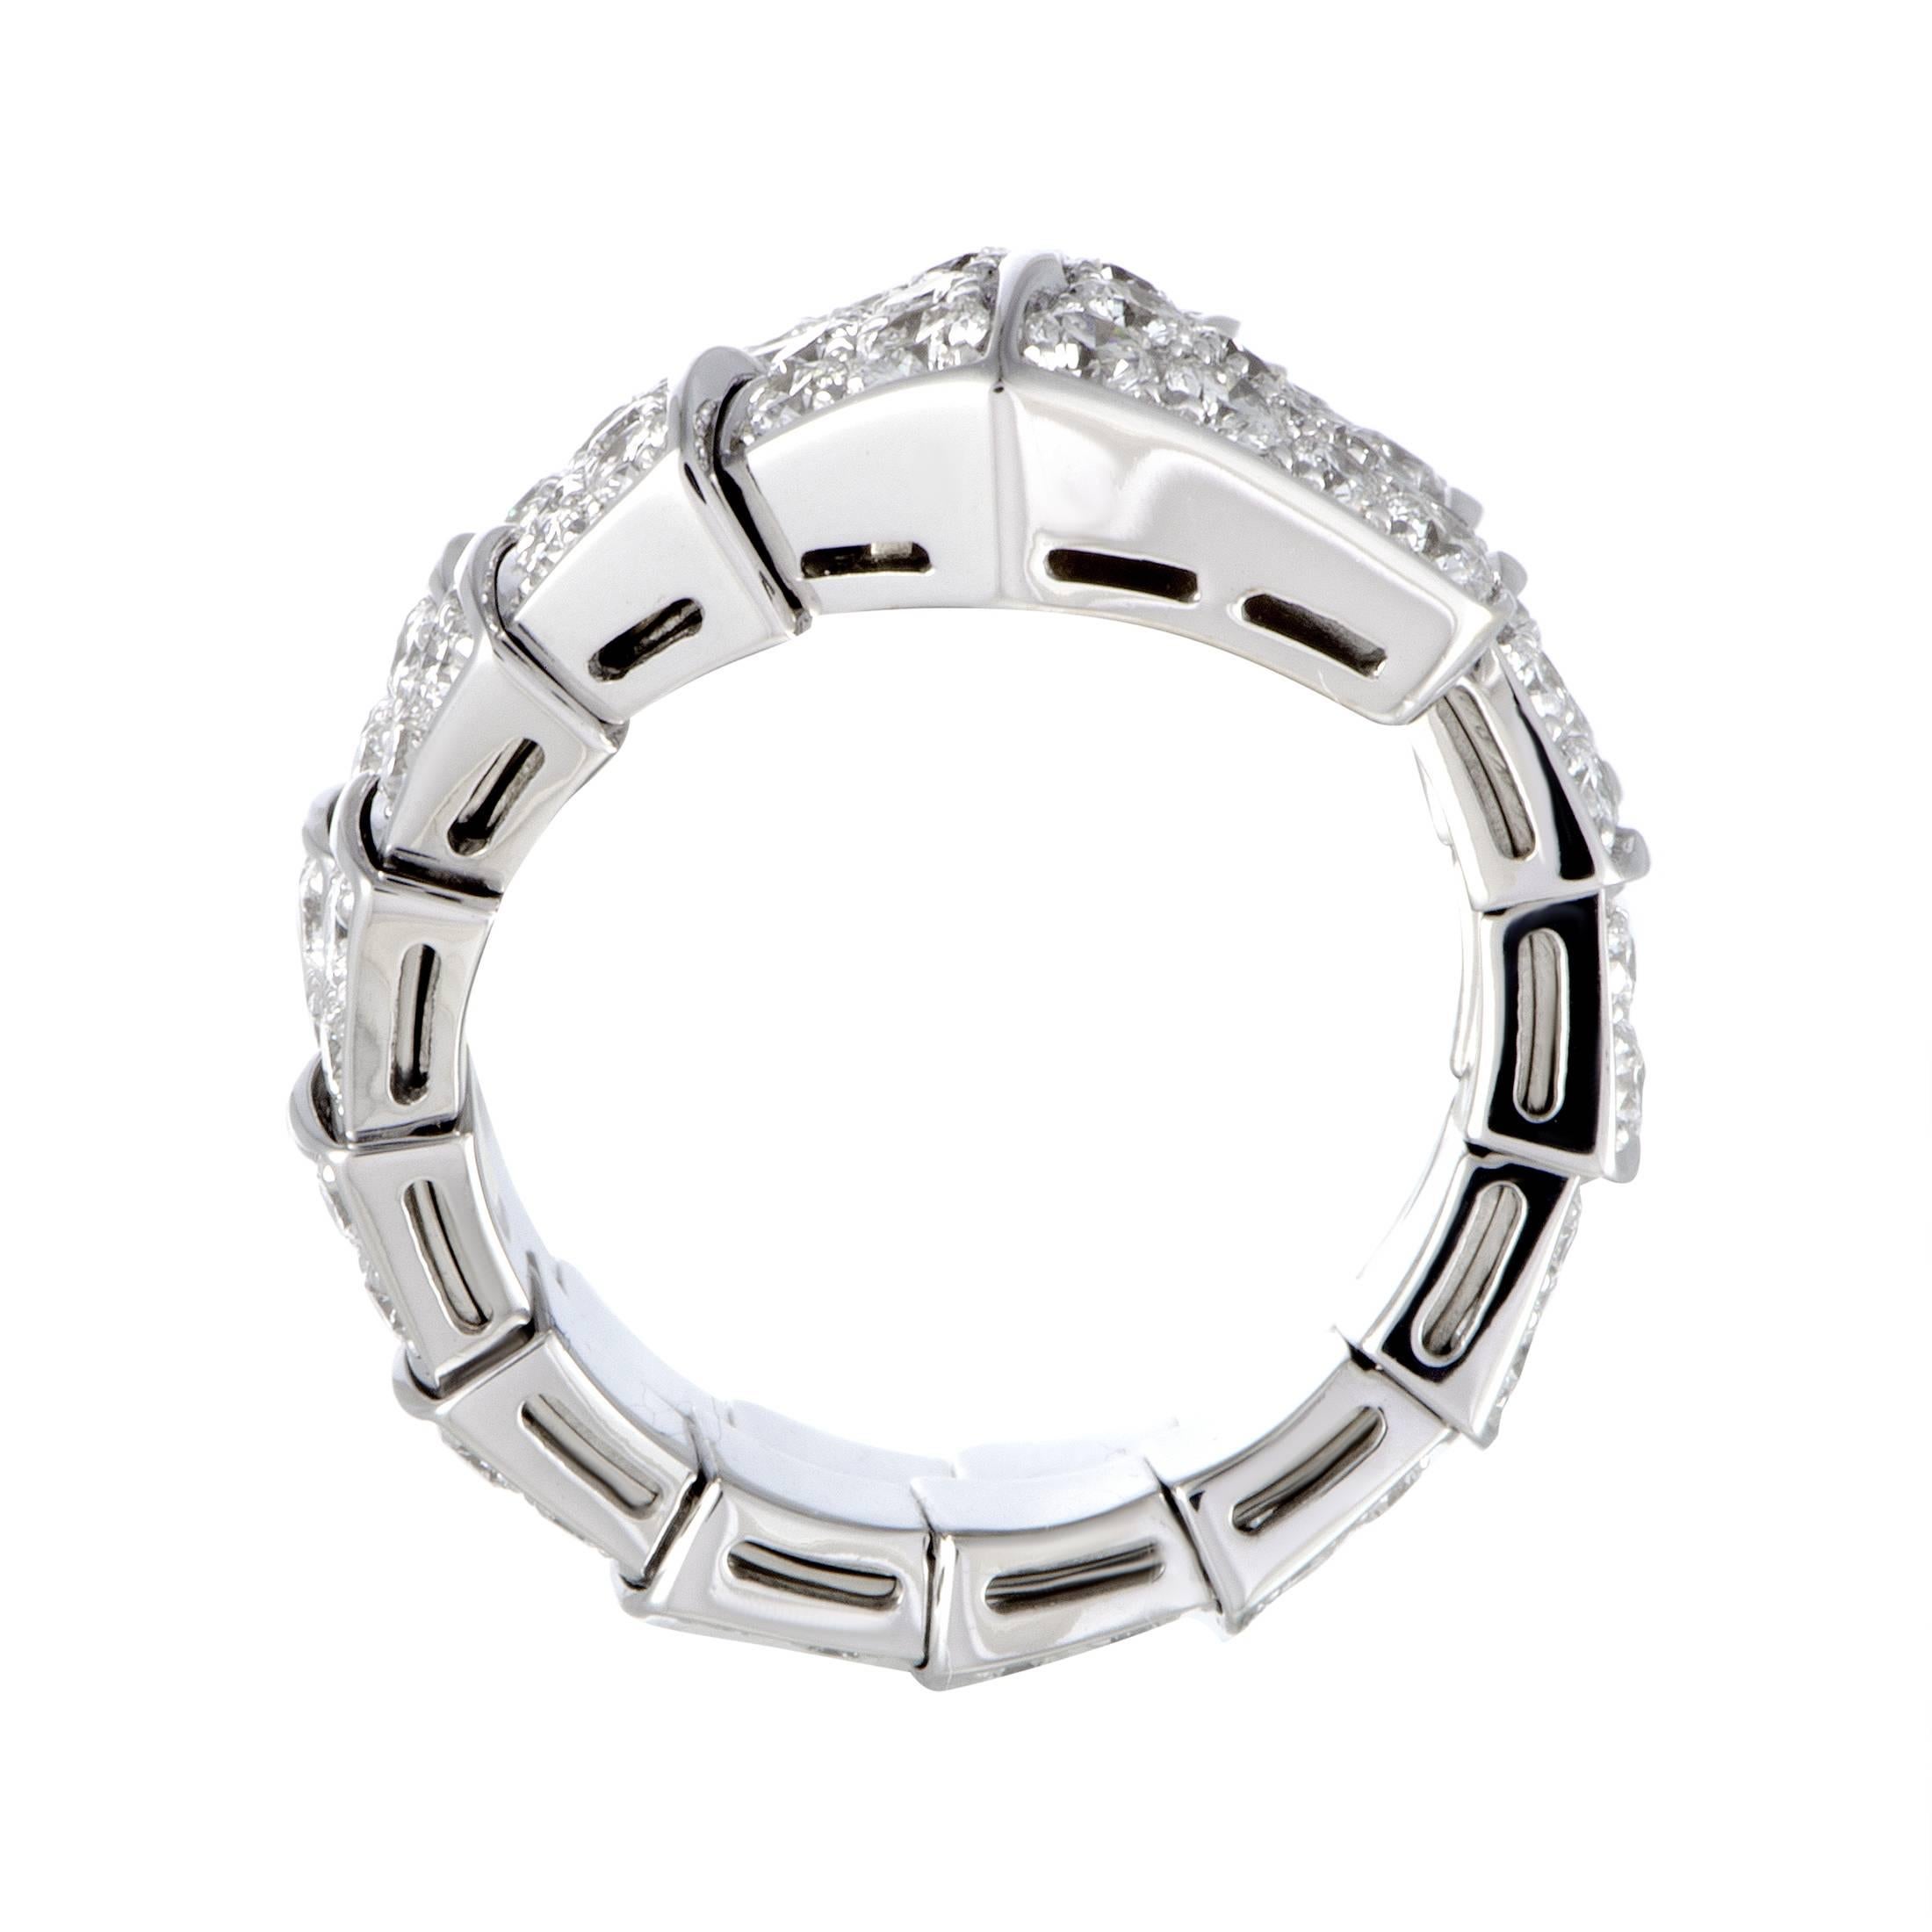 Gracefully coiling around your finger in an exceptionally lavish manner, this stunning Bvlgari ring adds a sublime touch of opulence to your attire. Presented within the fascinating “Serpenti” collection, the ring is made of 18K white gold and set